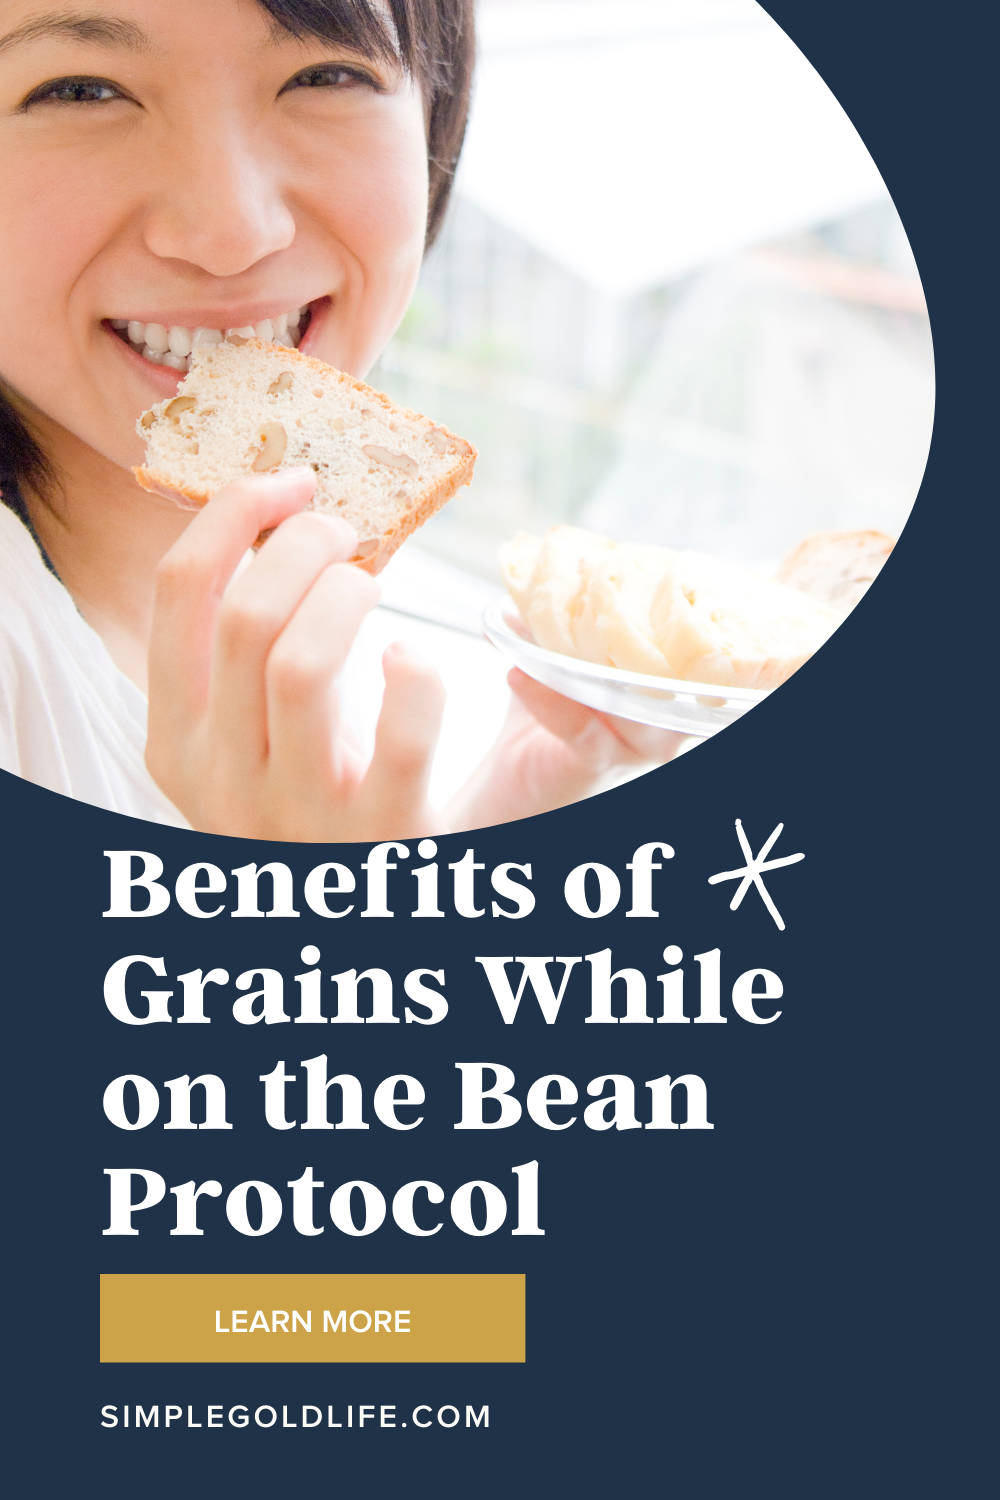 Benefits of Grains on the Bean Protocol 1.png